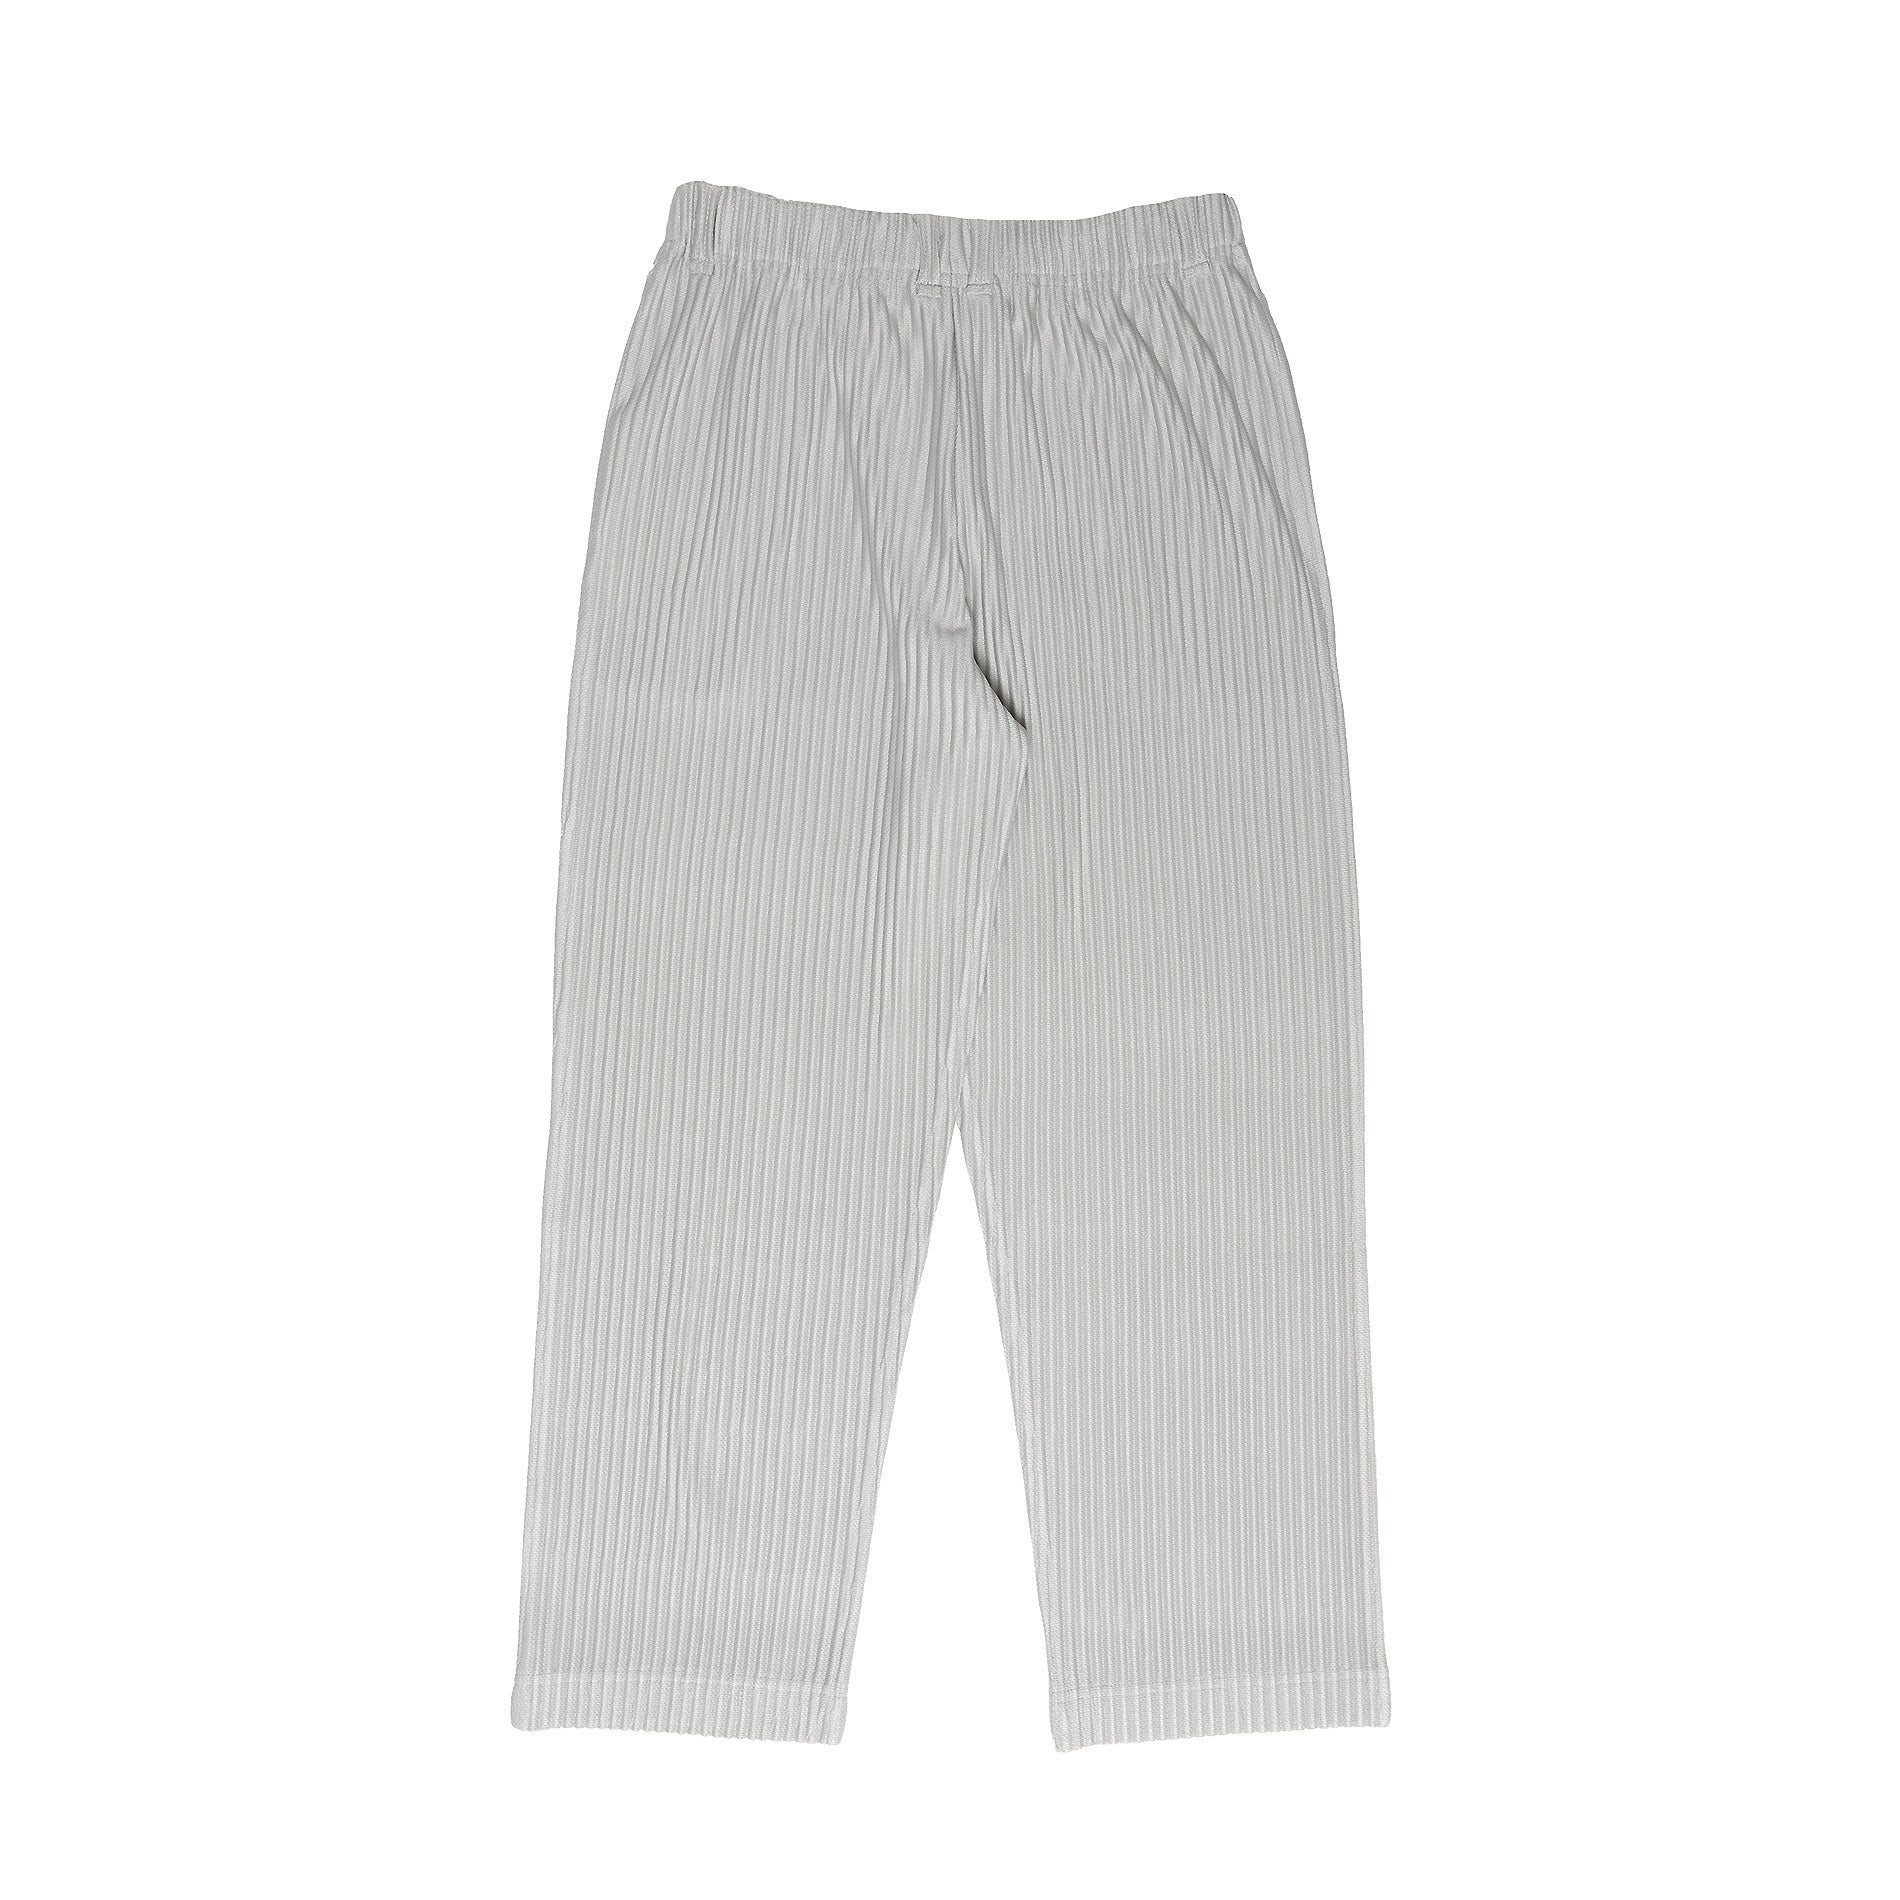 Issey Miyake Homme Plisse Gray Pleated Pants